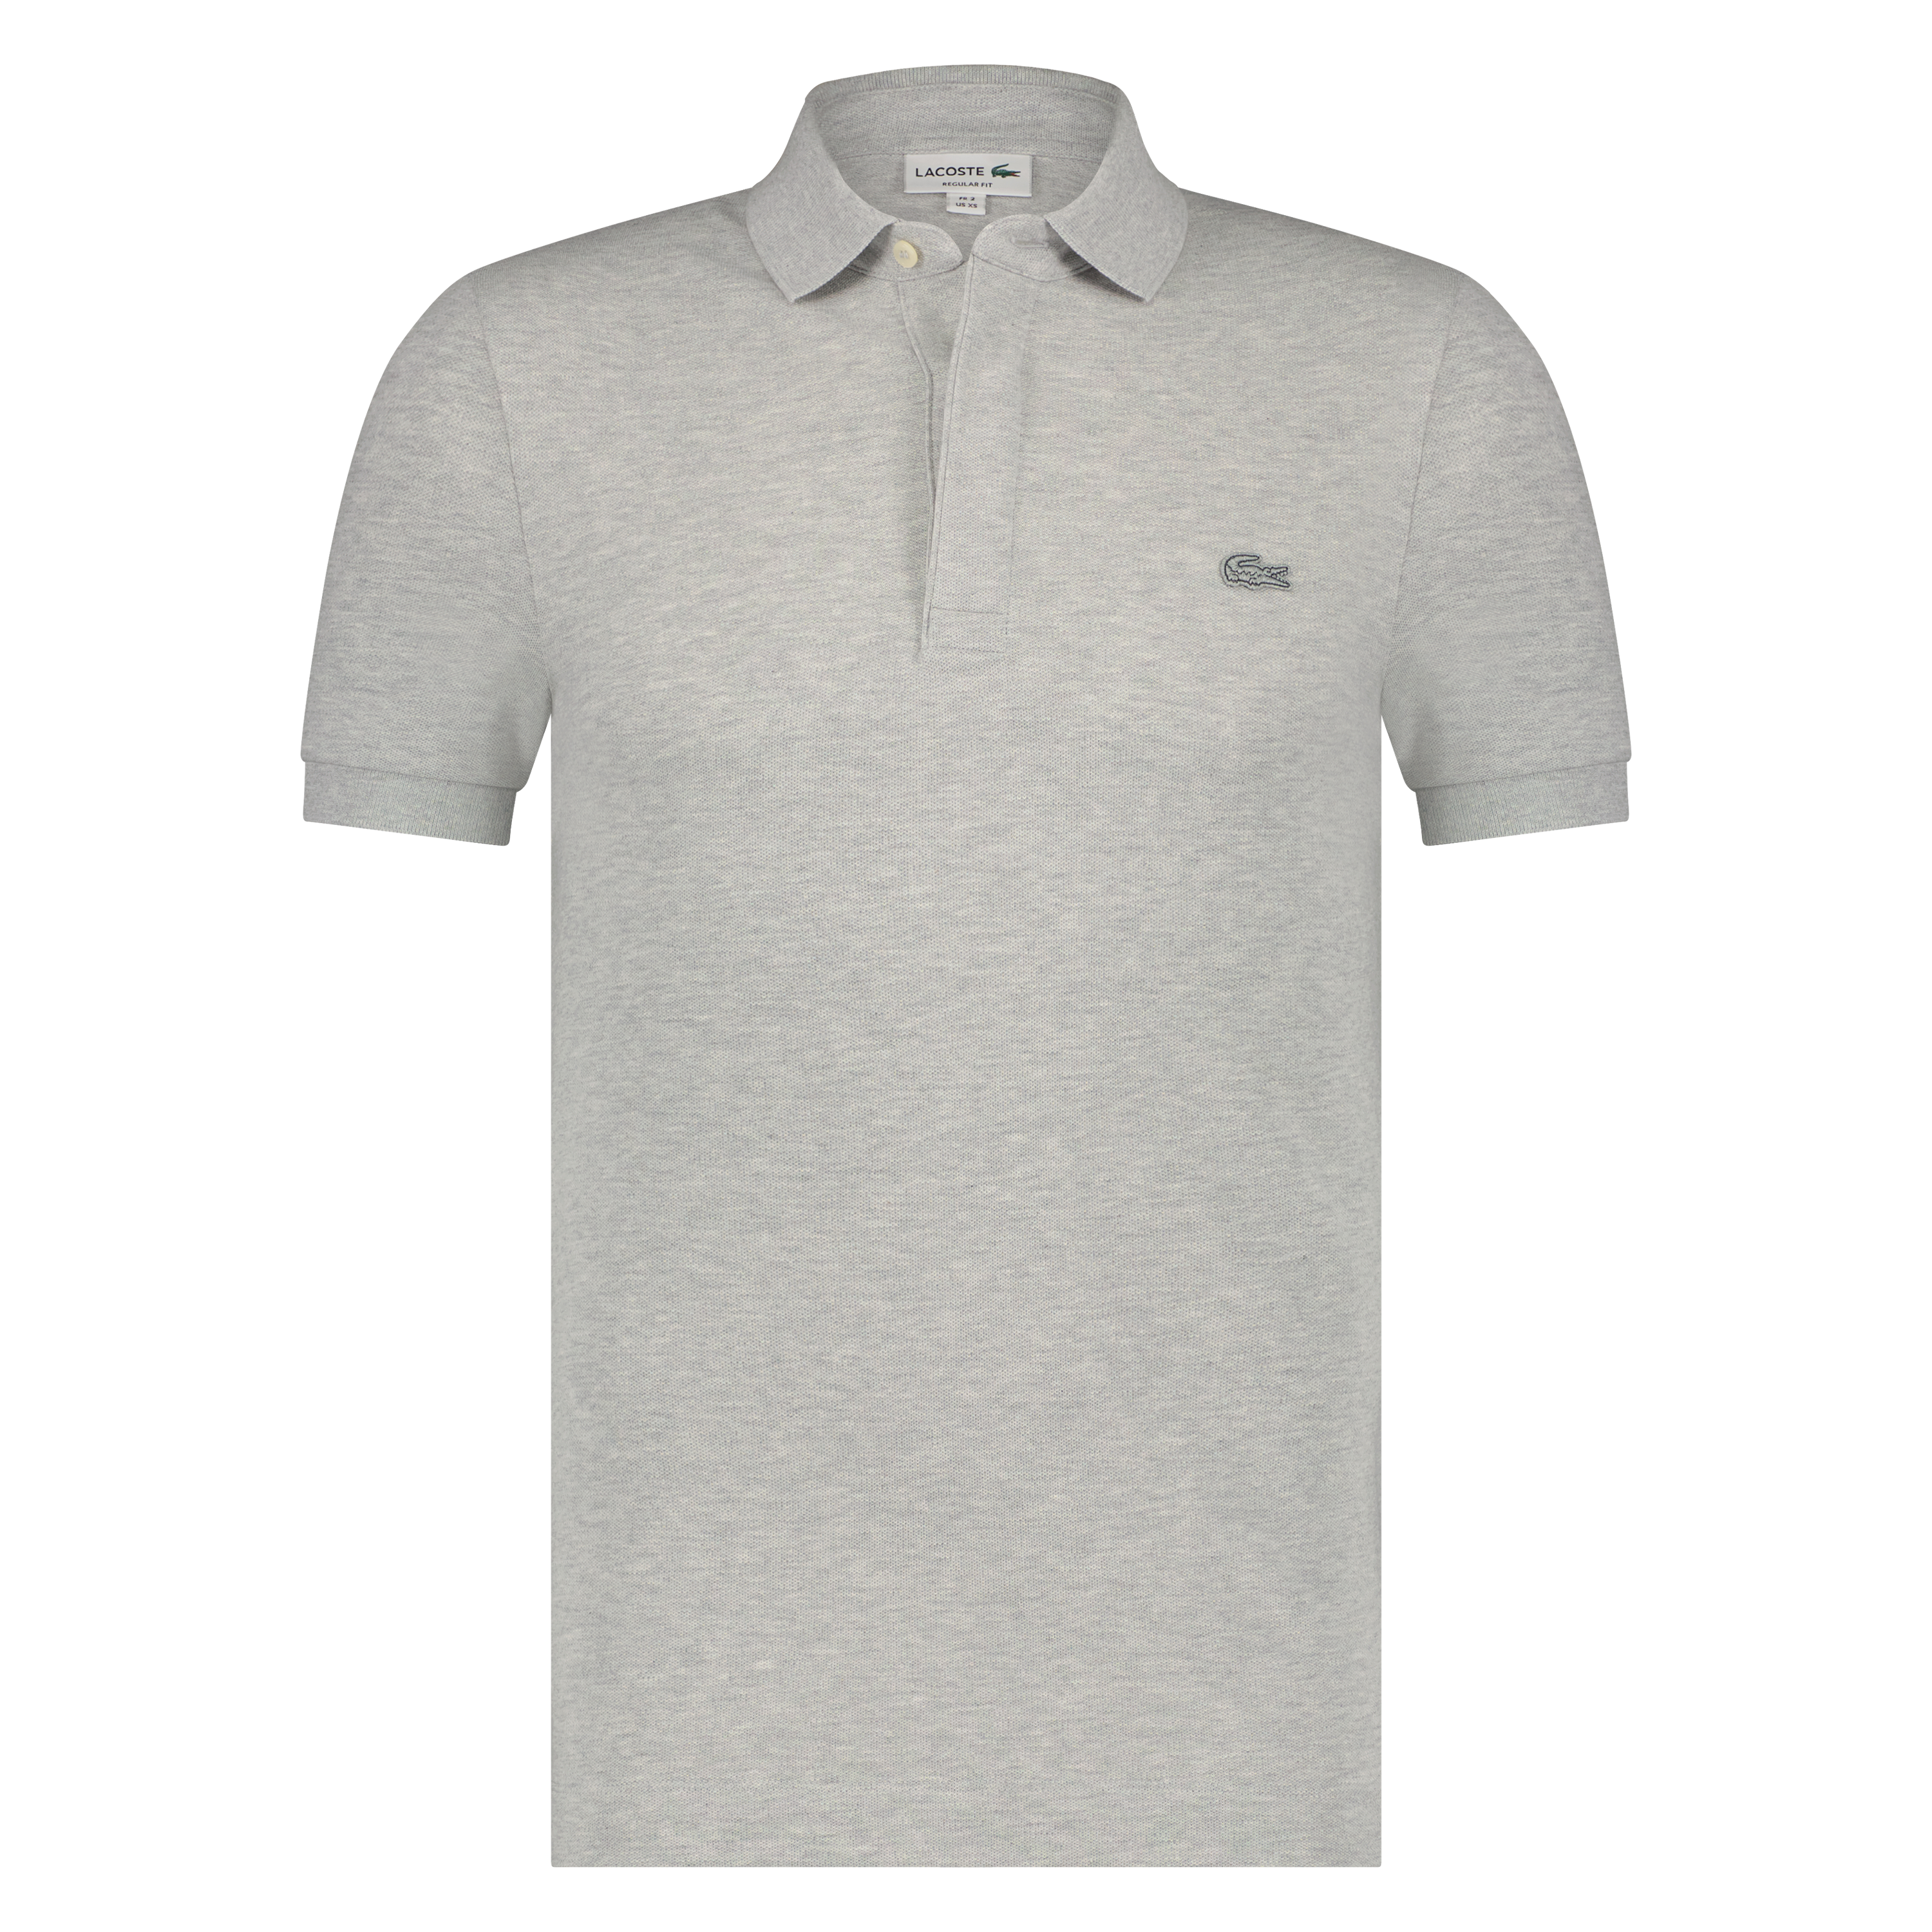 Orkaan keten schuld Lacoste heren polo silver chine